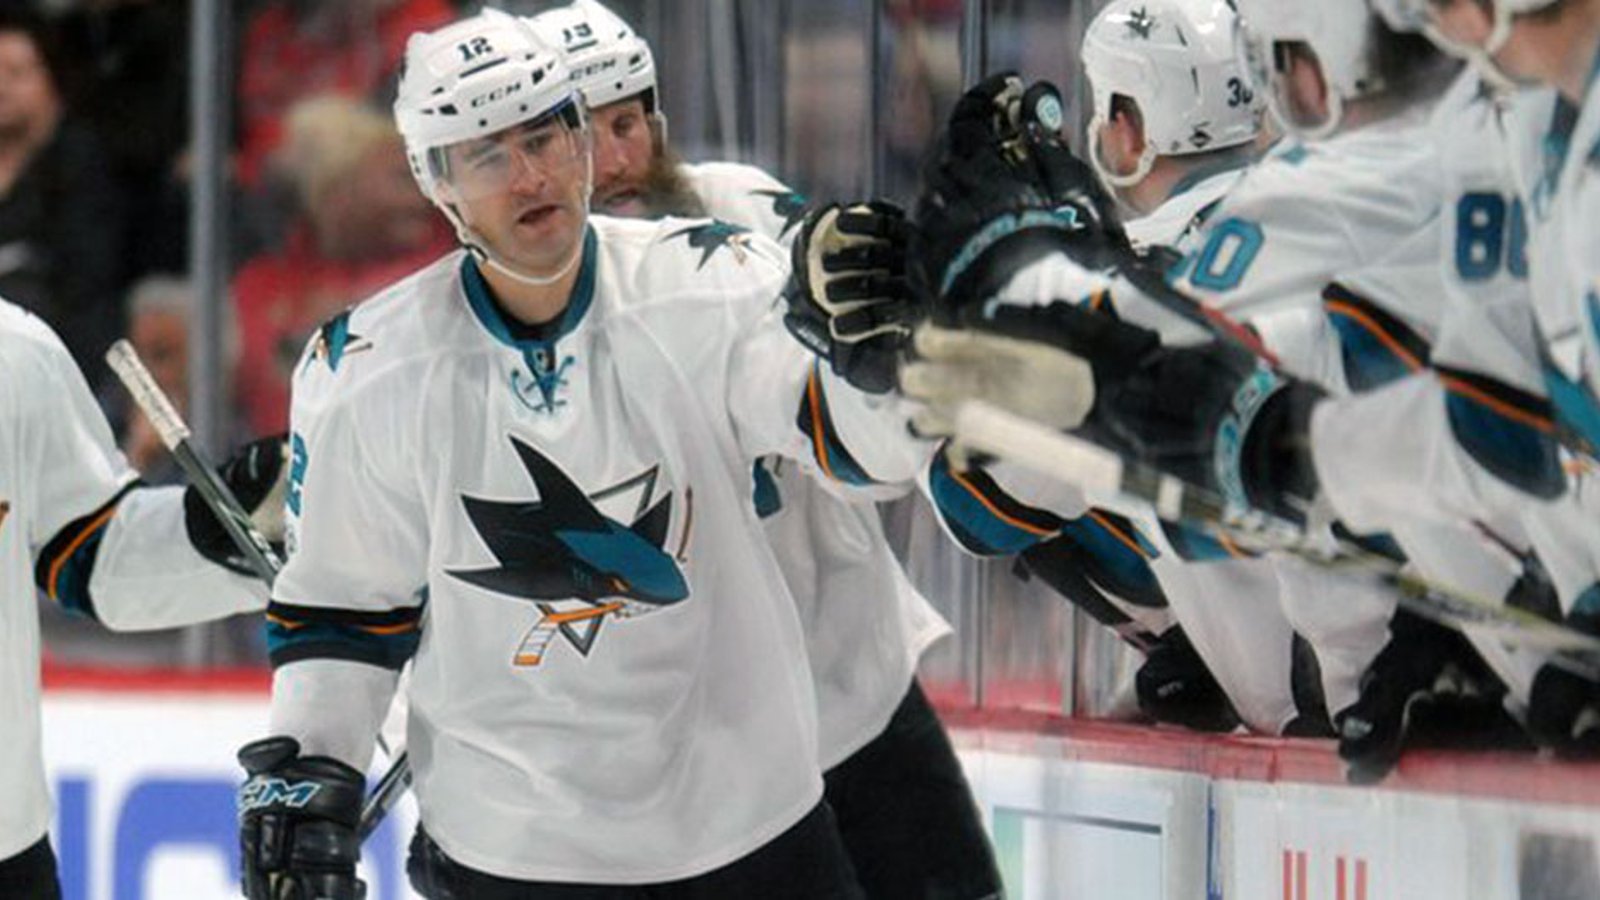 Marleau scores two goals in his return to Sharks